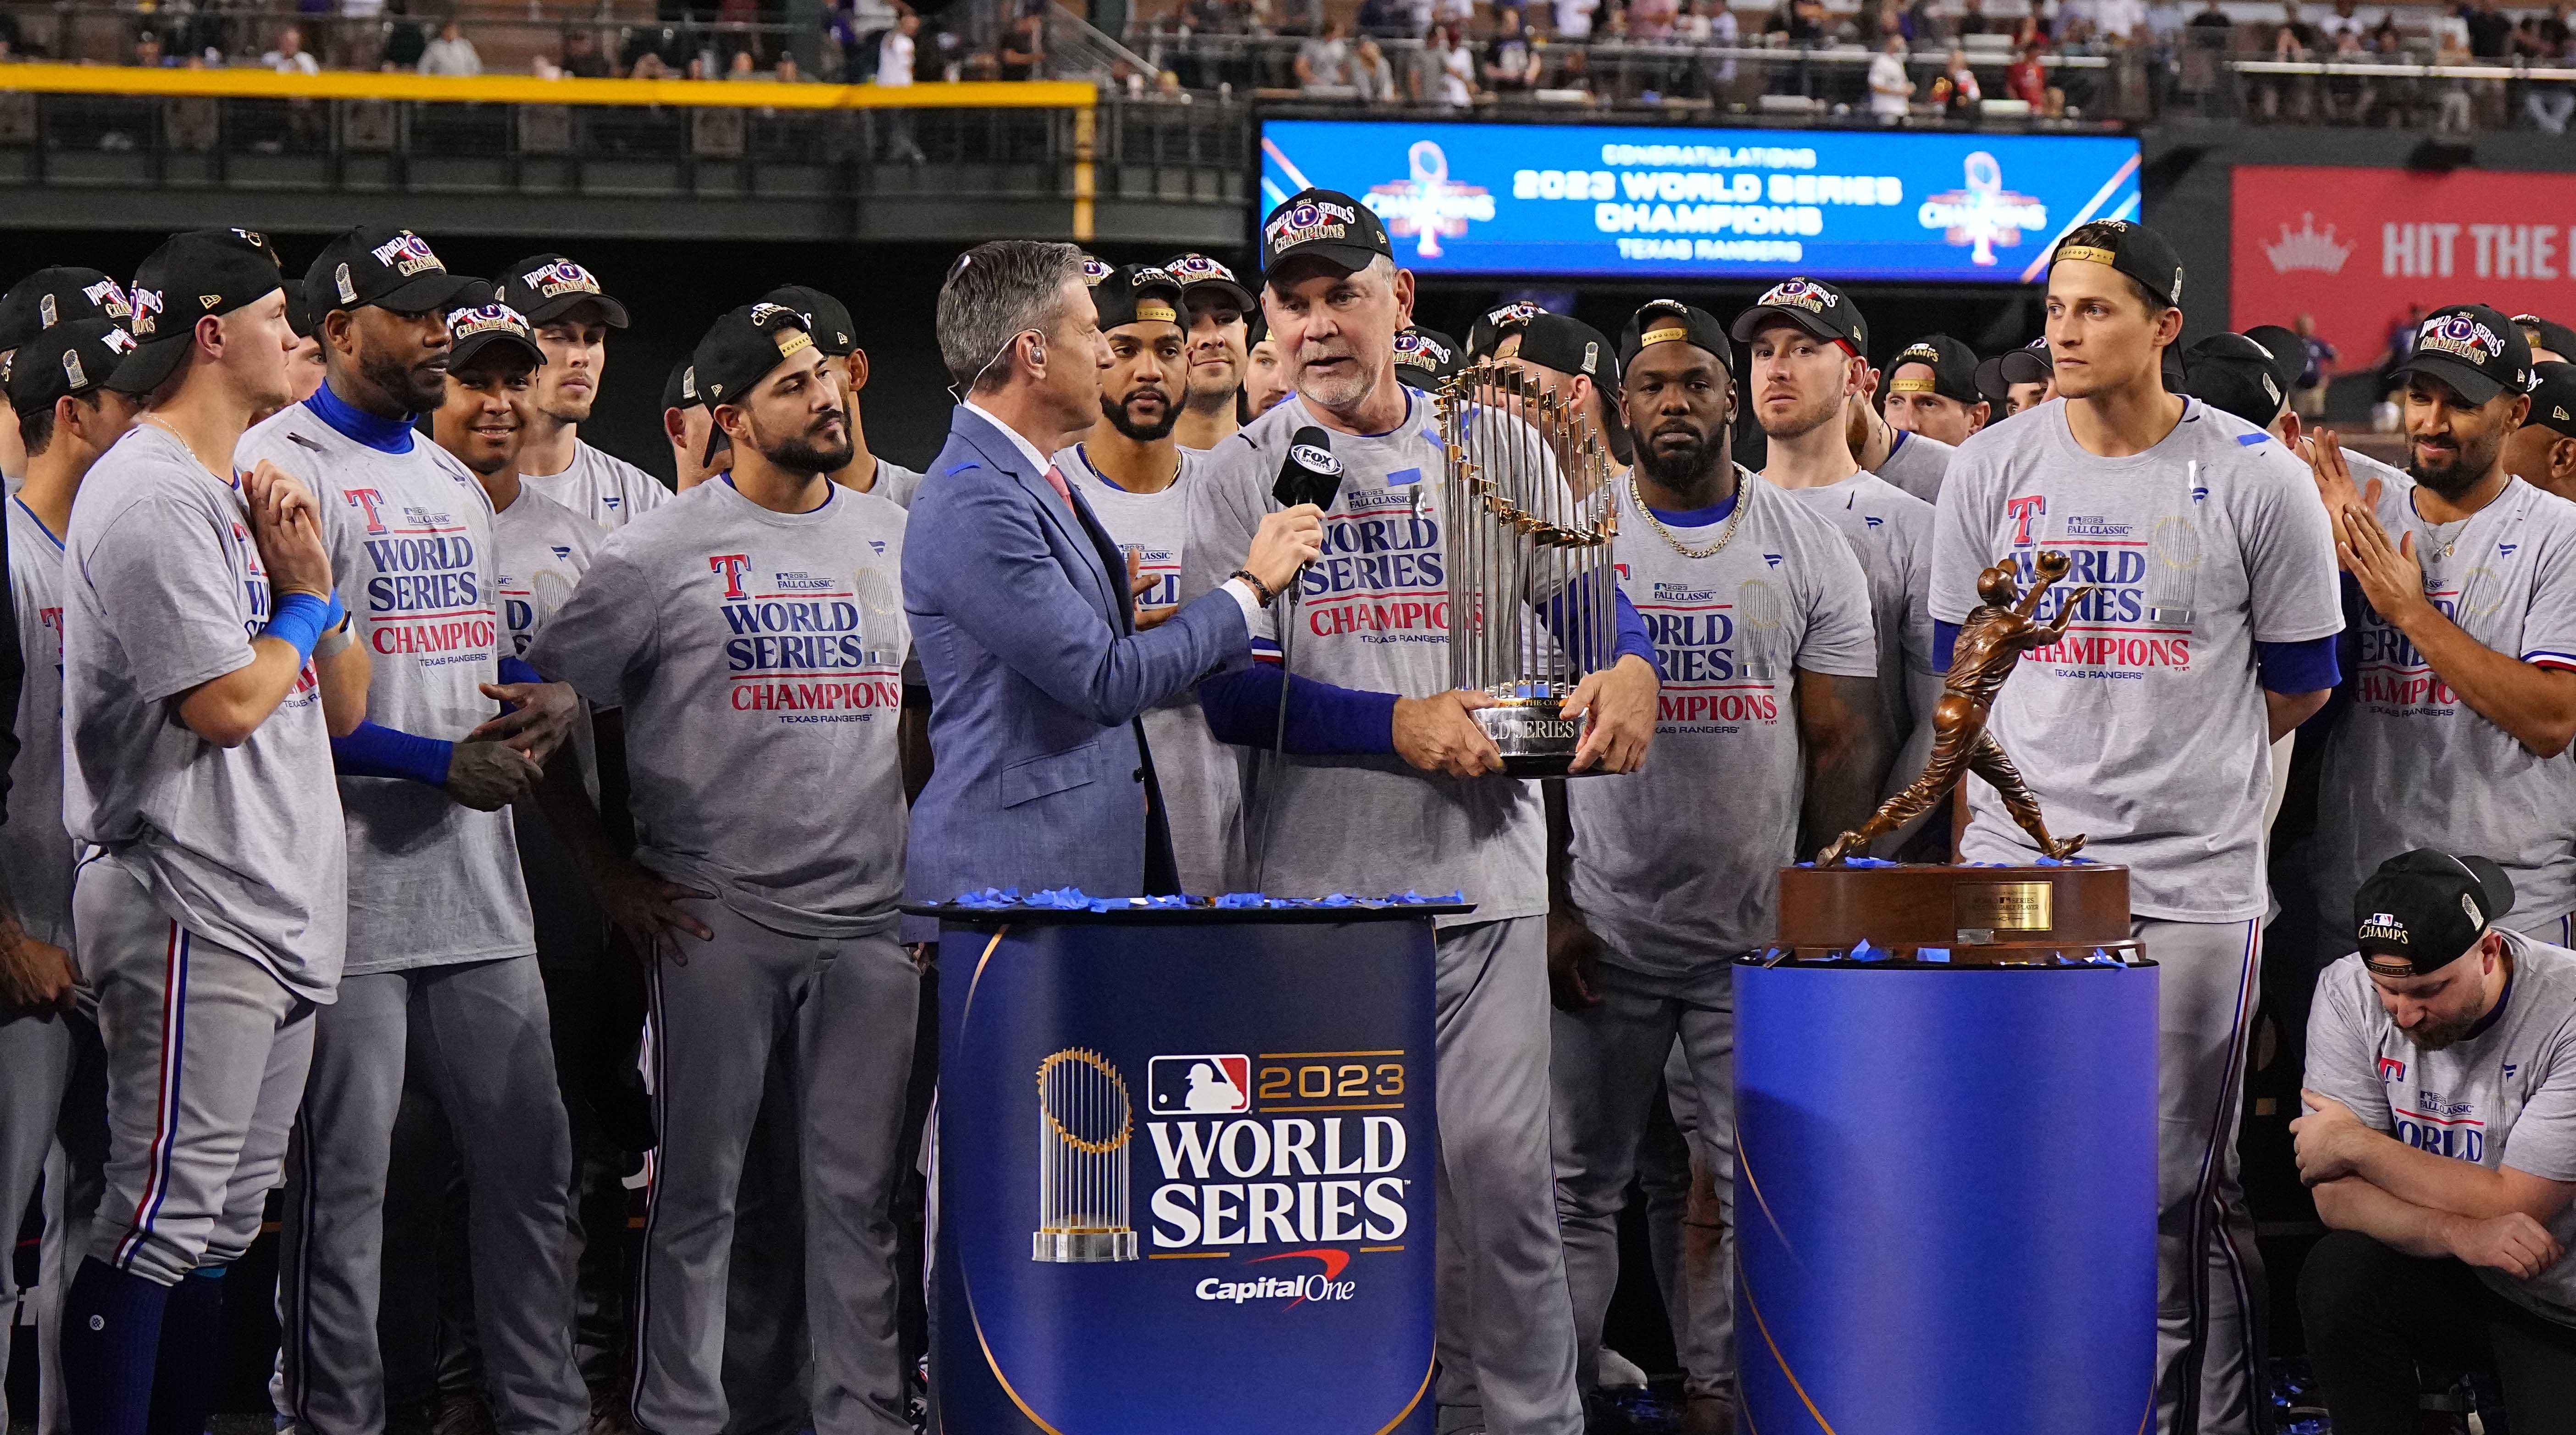 Bruce Bochy with the World Series trophy.